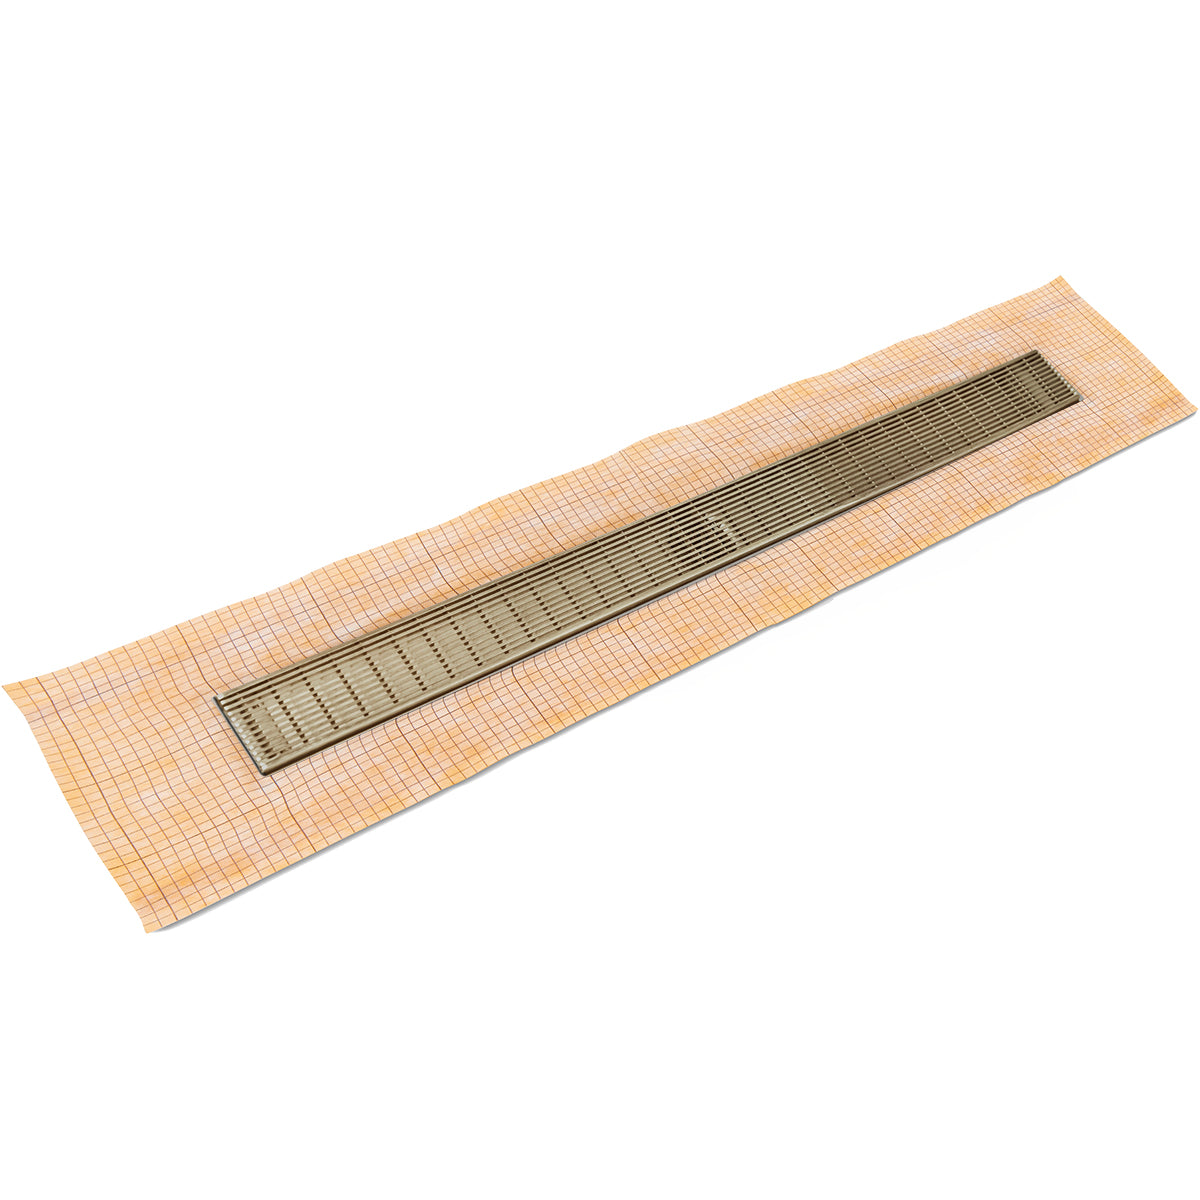 Infinity Drain 48" FCS Series Schluter-Kerdi - Fixed Flange Linear Drain Kit with 2 1/2" Wedge Wire Grate